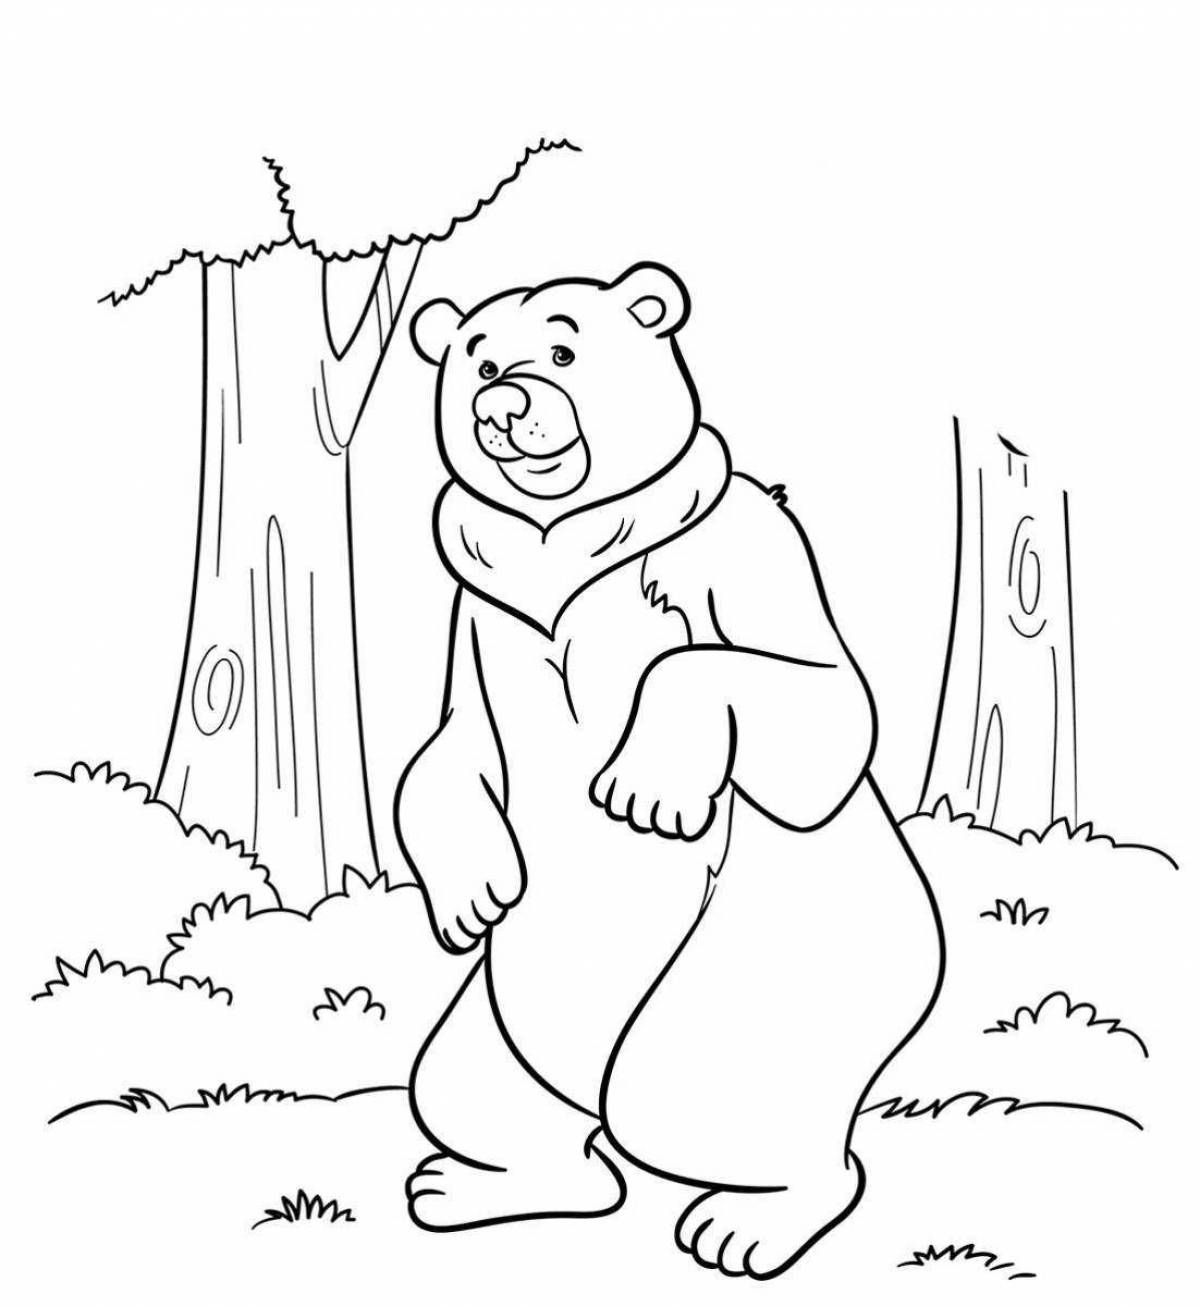 Crazy Bear coloring pages for 4-5 year olds